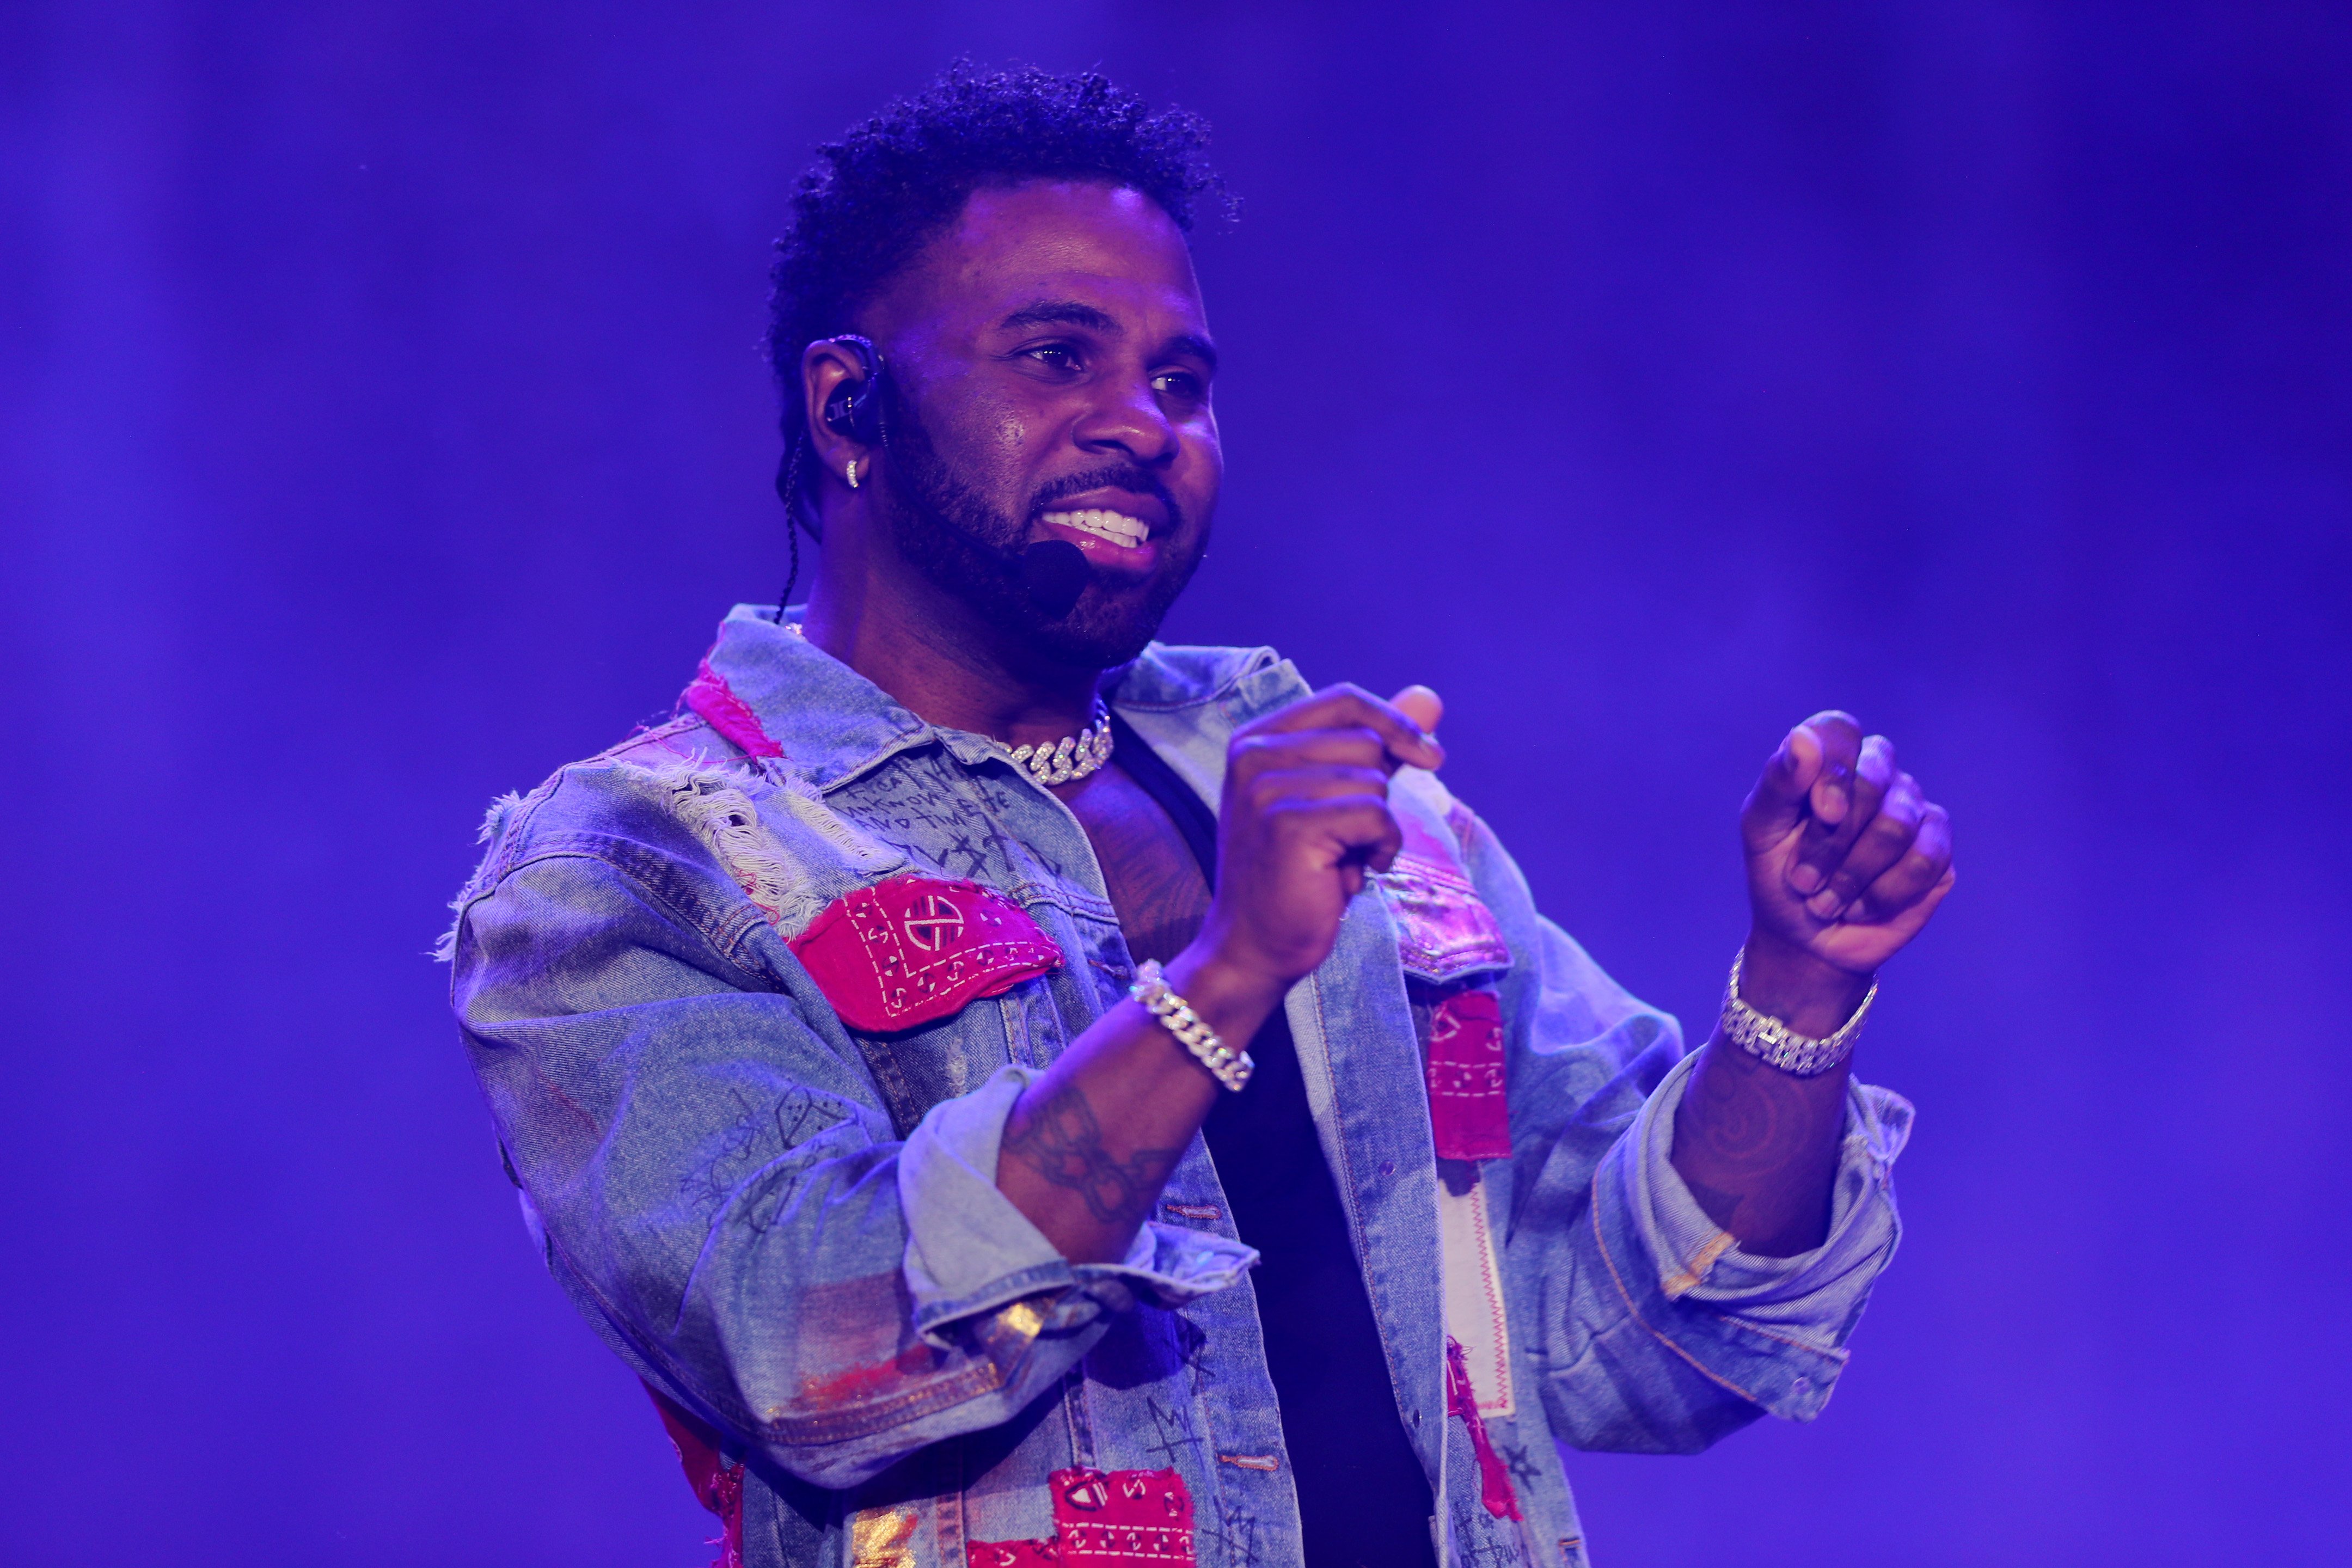 Jason Derulo performs on stage during MDLBEAST SOUNDSTORM 2021